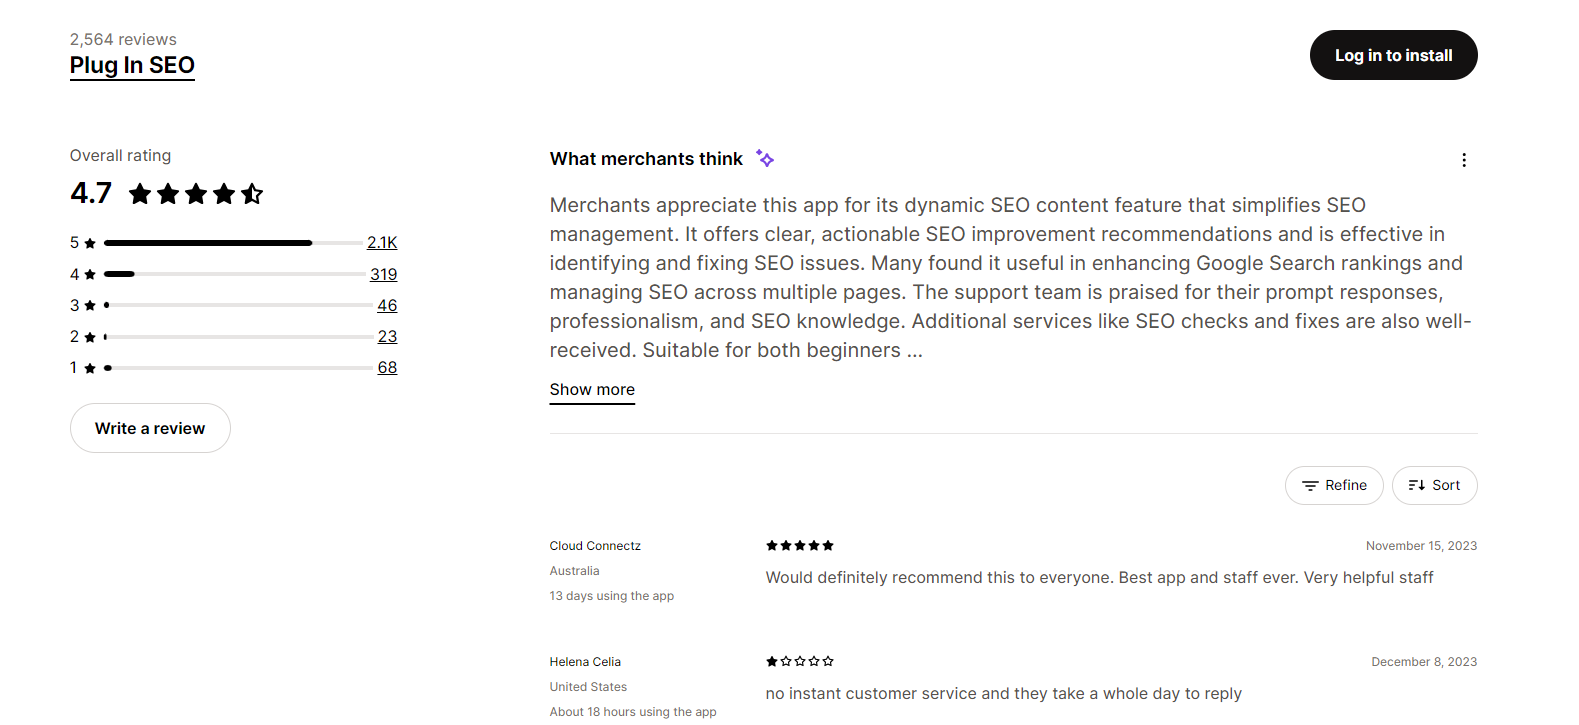 Plug in SEO’s Rating and Review